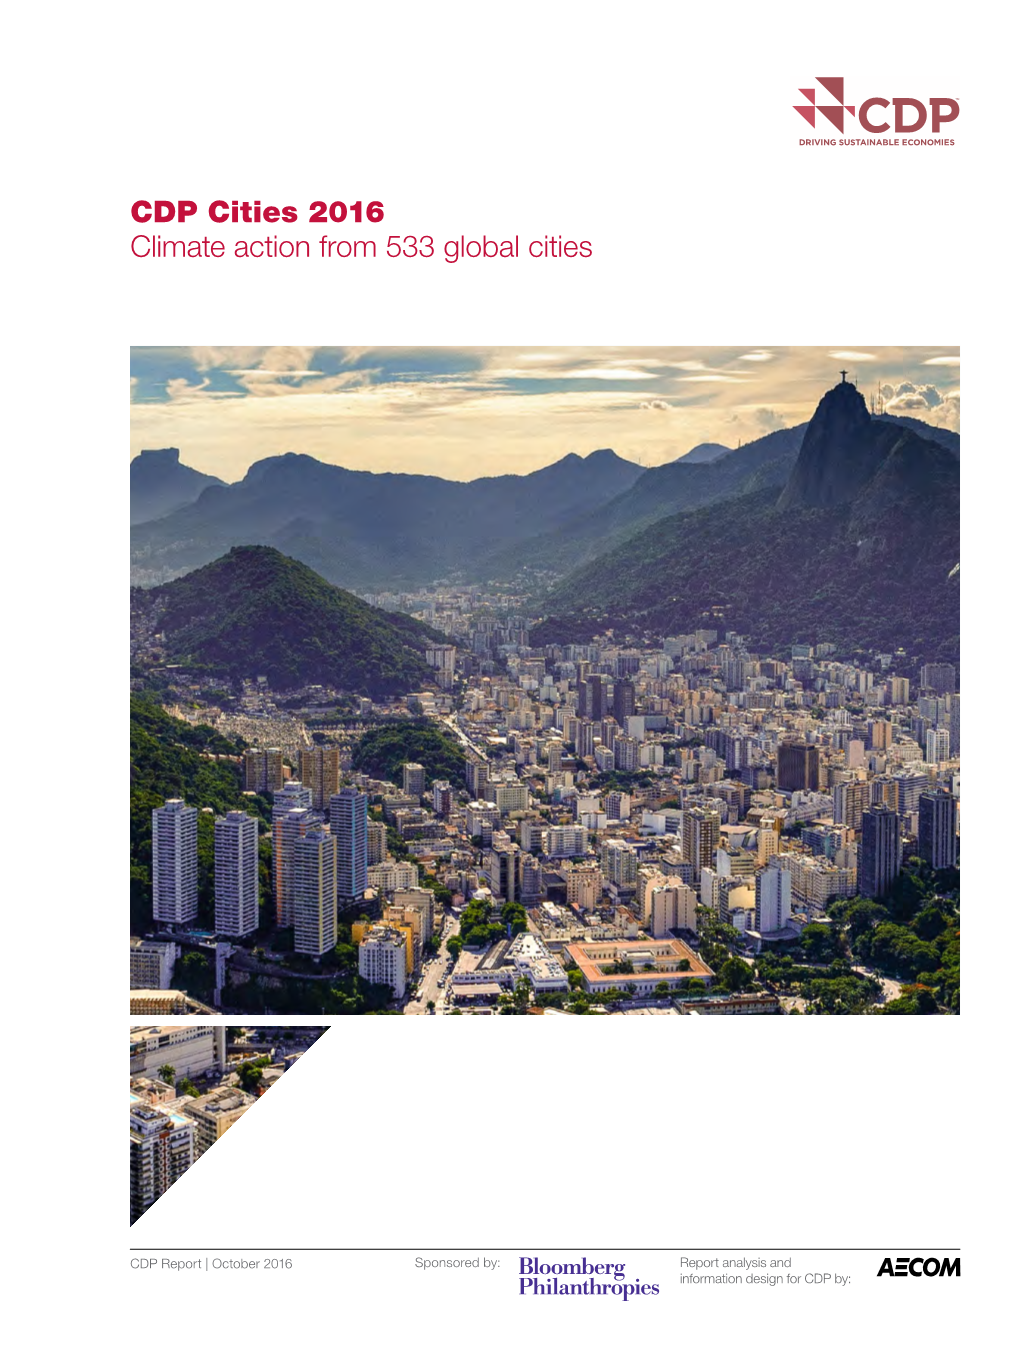 CDP Cities 2016 Climate Action from 533 Global Cities